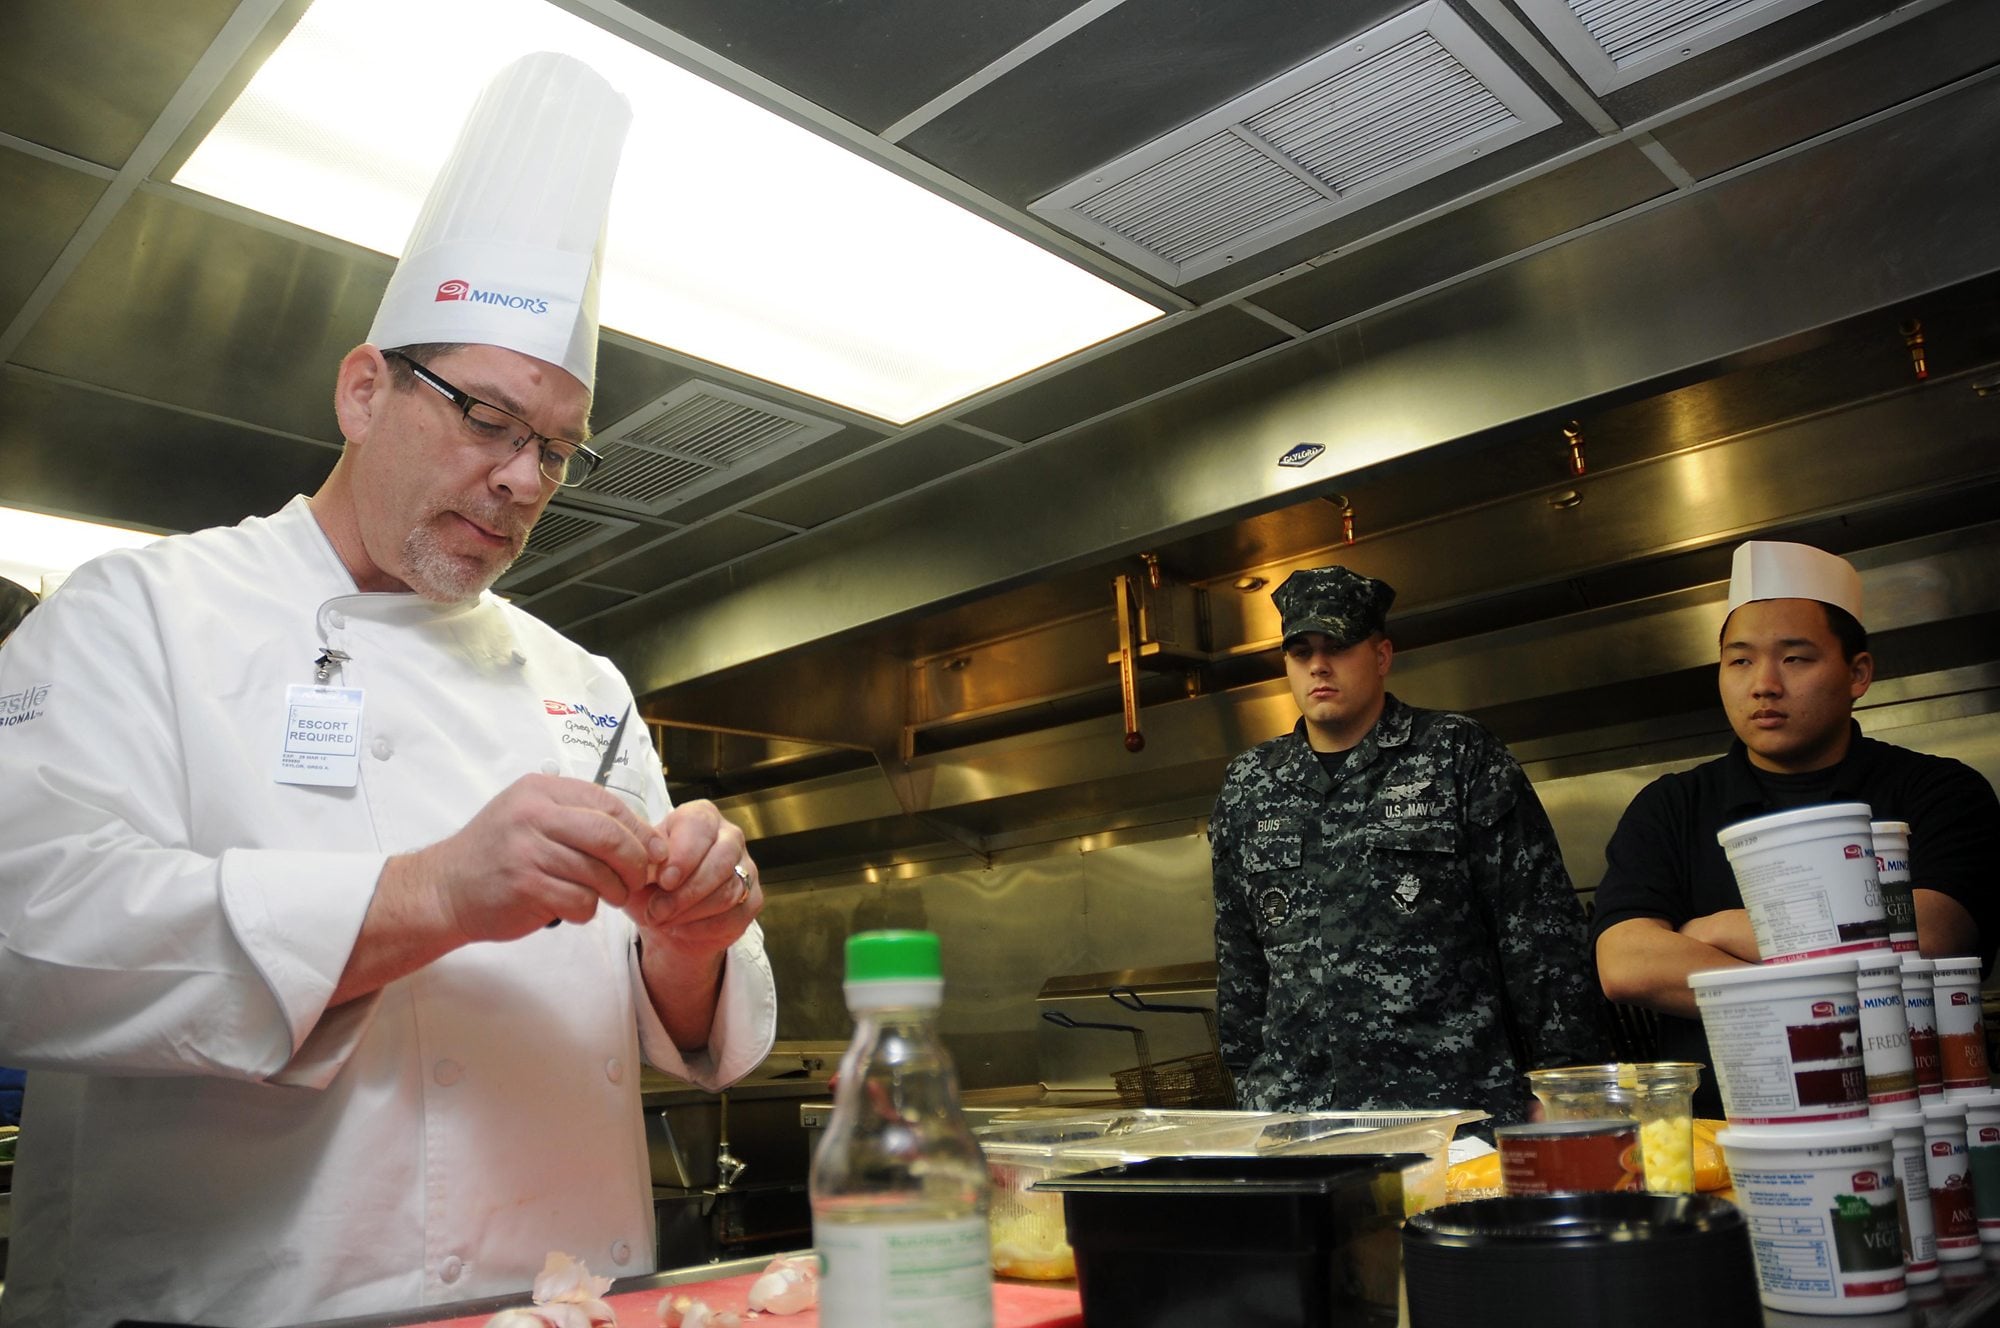 Vancouver: Corporate Executive Chef Greg A. Taylor, from Vancouver, peels garlic while demonstrating food service skills for sailors assigned to the aircraft carrier USS Ronald Reagan in the galley of barge APL-62.